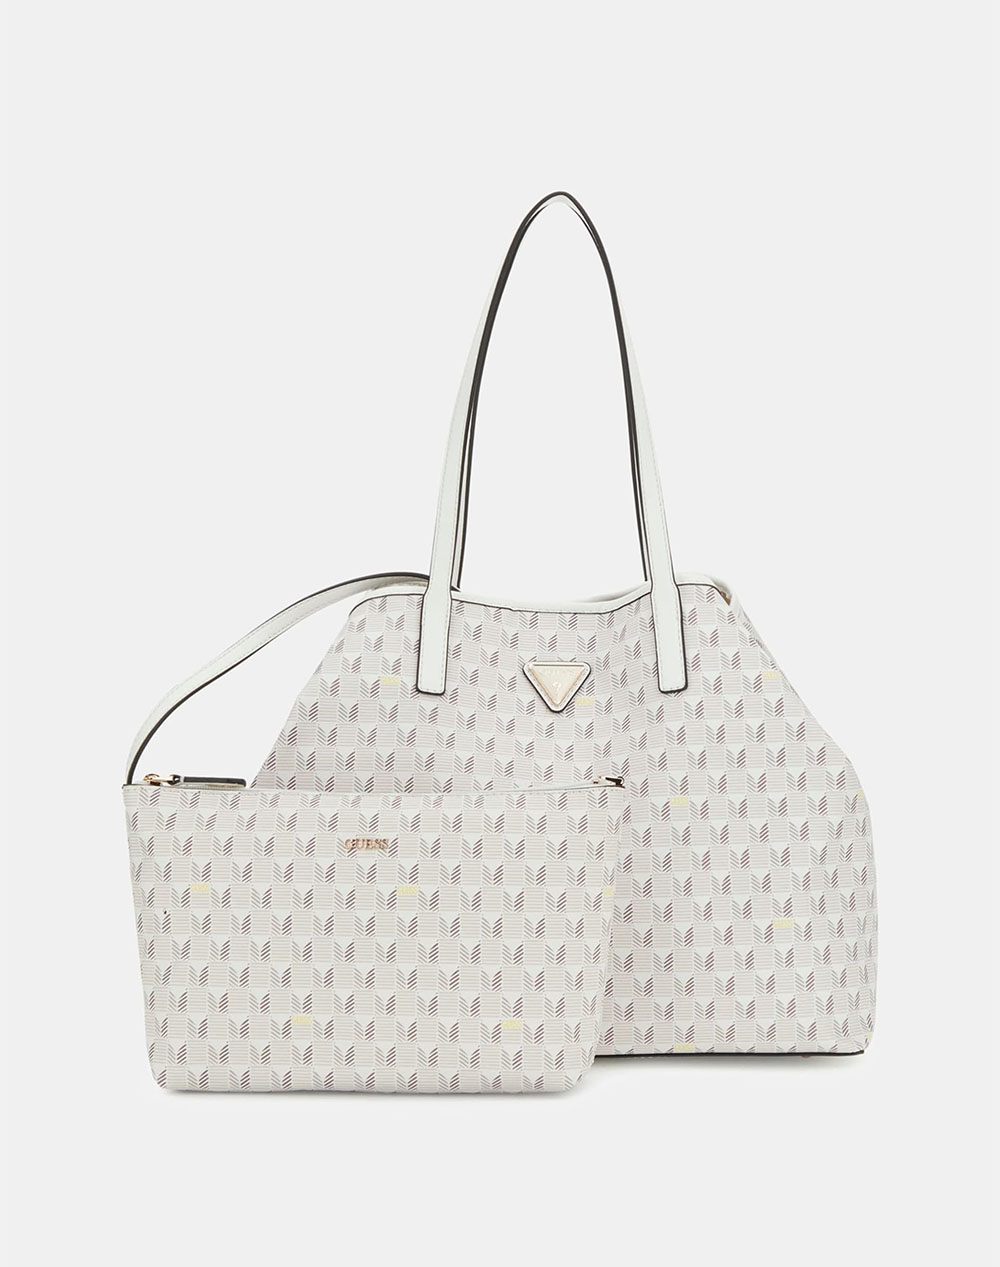 GUESS VIKKY II LARGE TOTE ΤΣΑΝΤΑ ΓΥΝΑΙΚΕΙΟ (Διαστάσεις: 40 x 31 x 18 εκ.) HWJT9318290-STL OffWhite